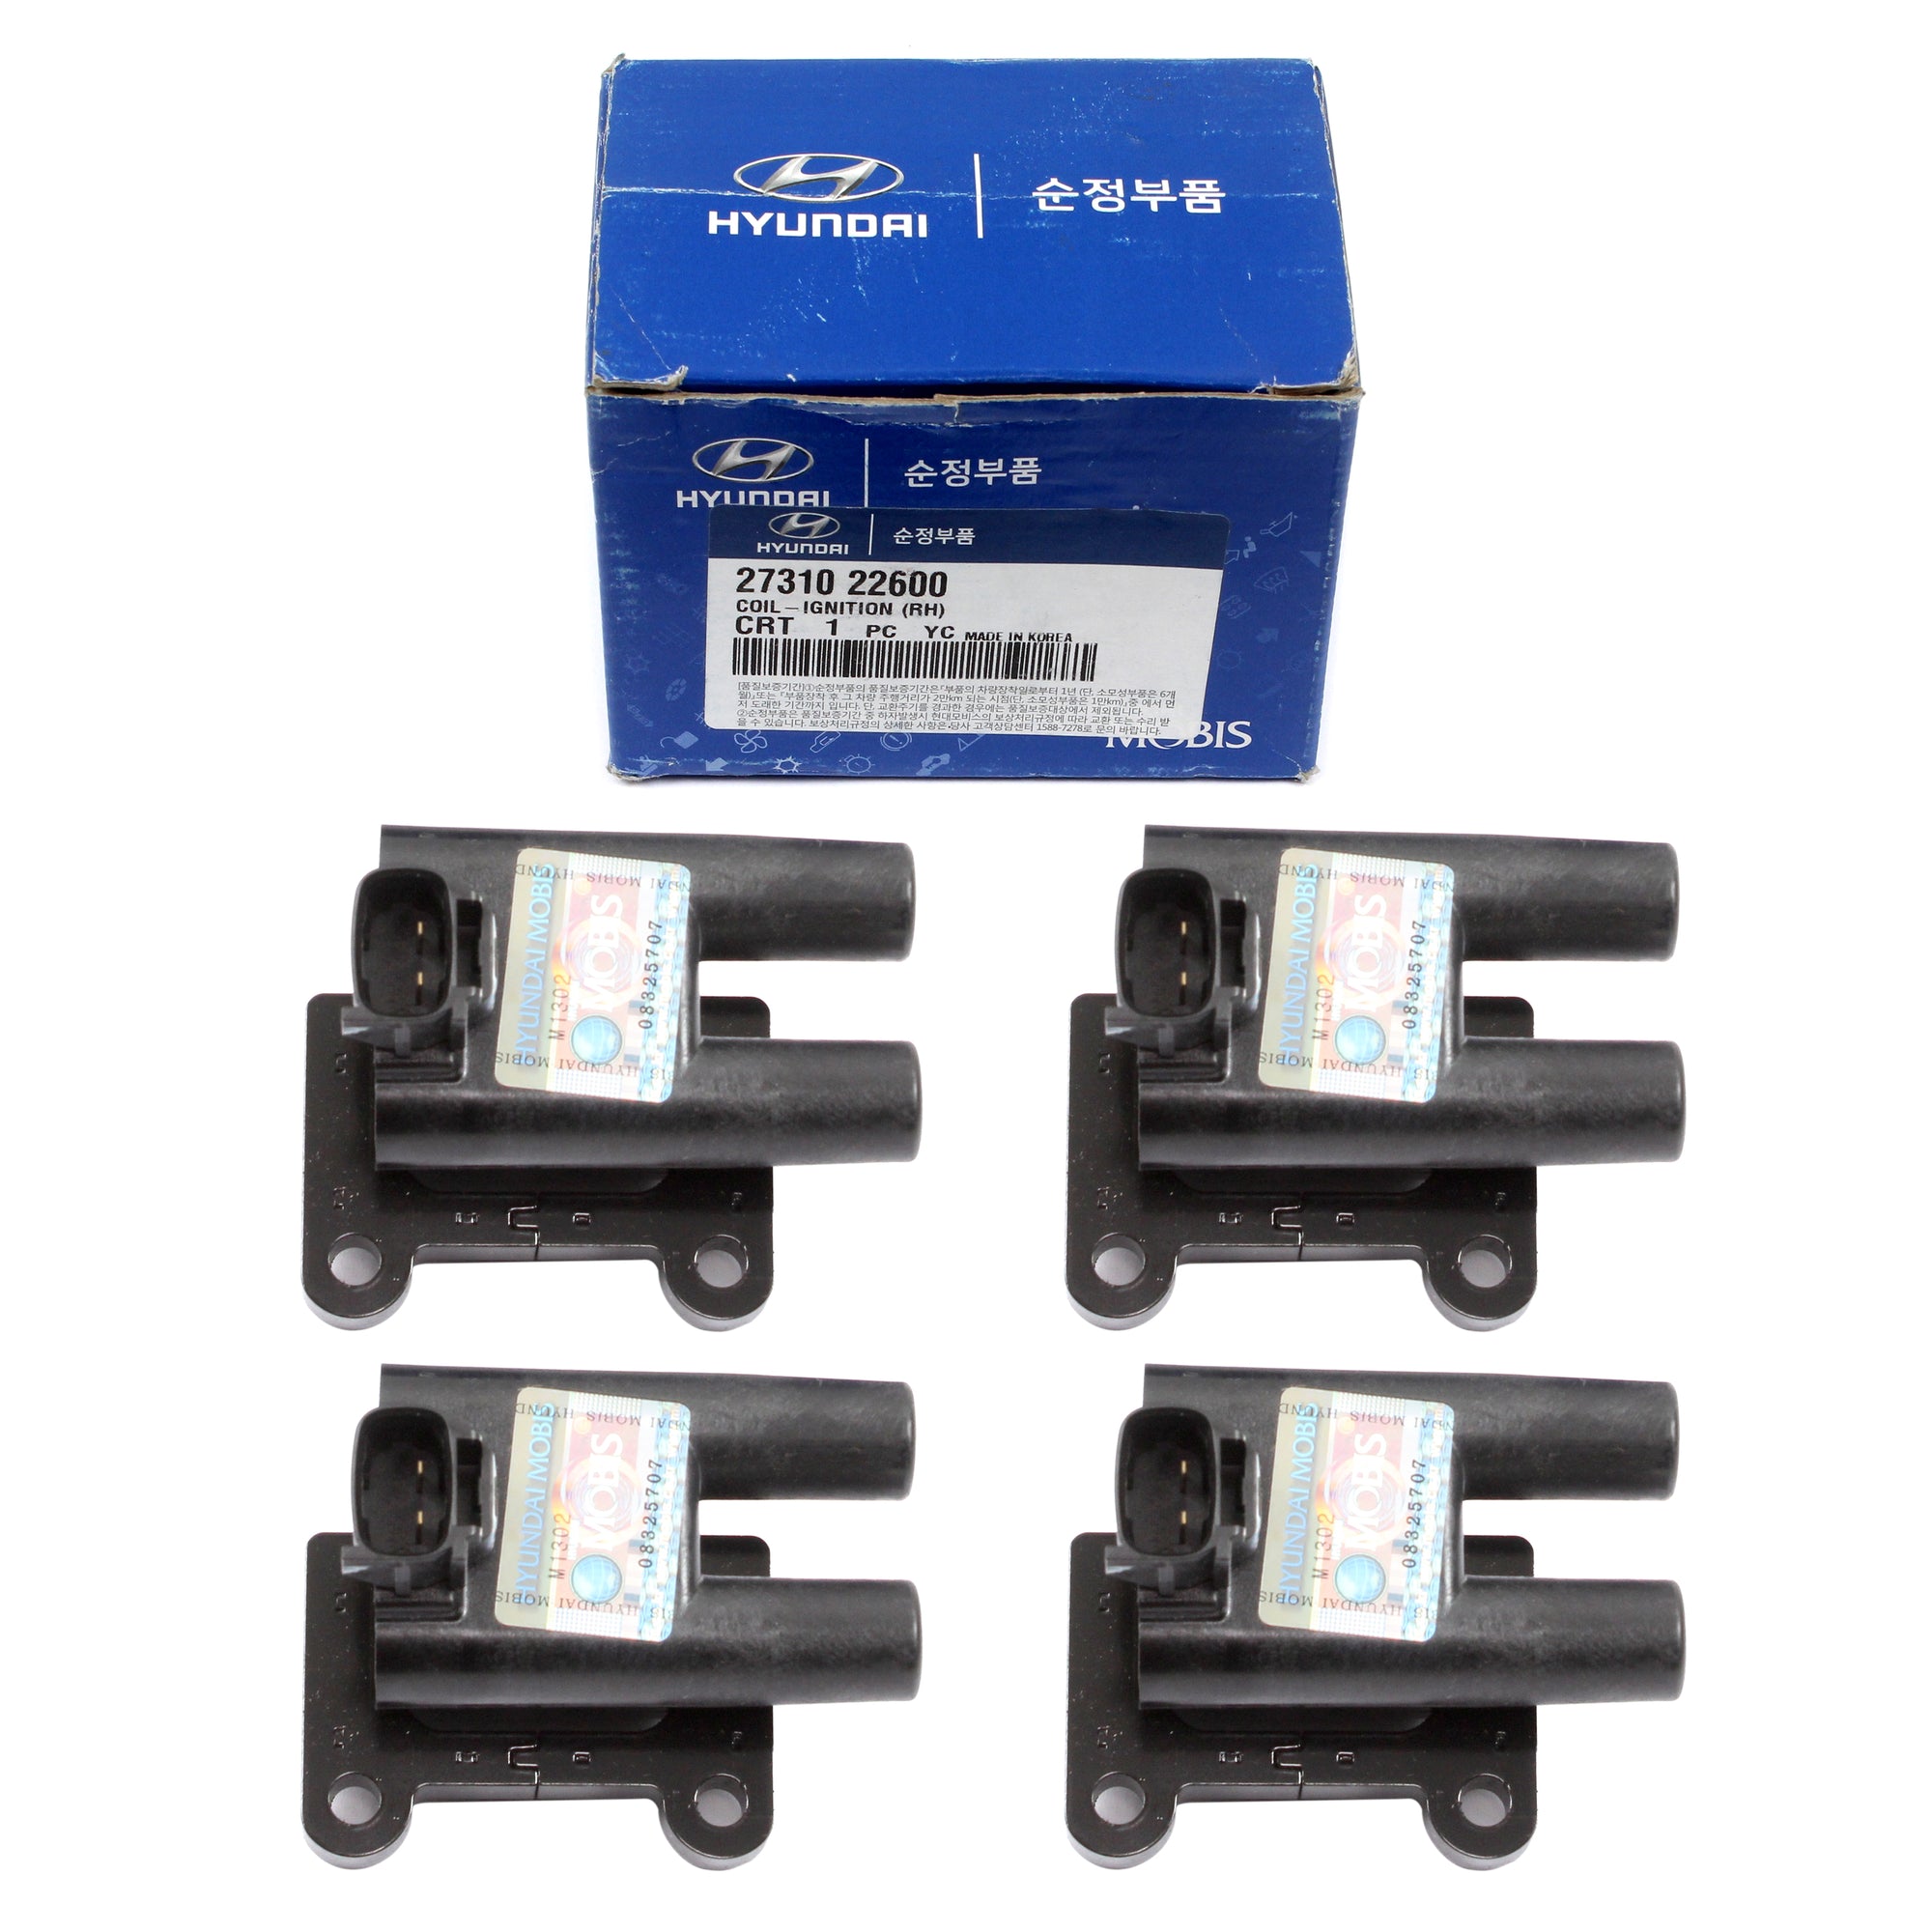 GENUINE 00-02 For Hyundai Accent 1.5 SOHC Ignition Coil OEM 27310-22600 SET OF 4